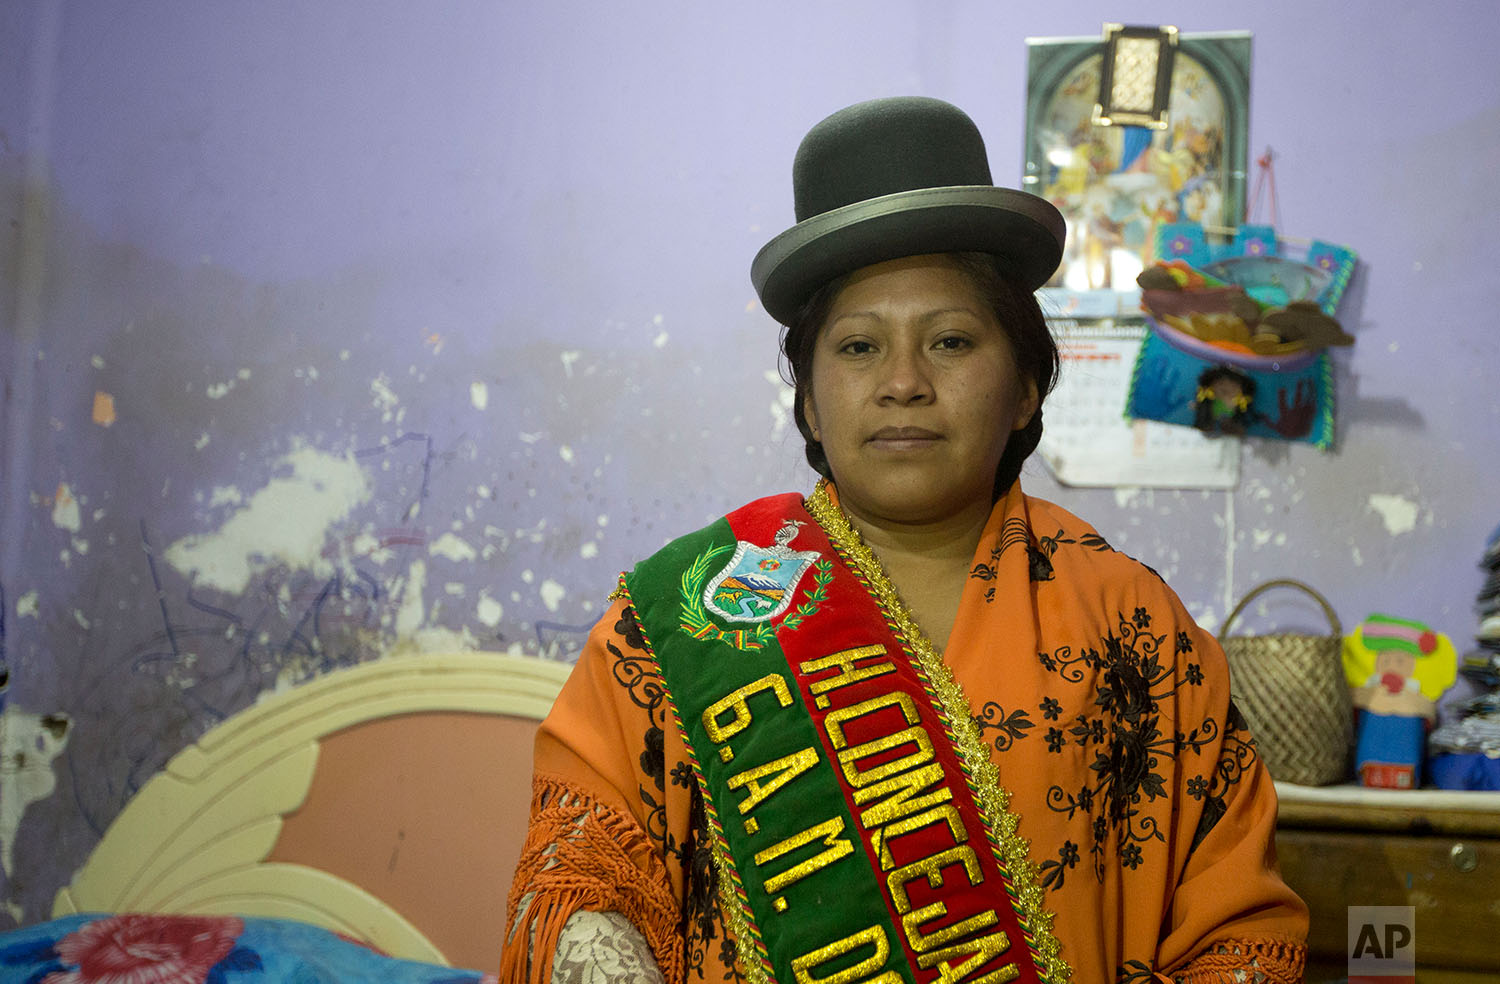  In this June 29, 2018 photo, Callapa Councilwoman Monica Paye, who is under house arrest, poses for a photo, in La Paz, Bolivia.  (AP Photo/Juan Karita) 